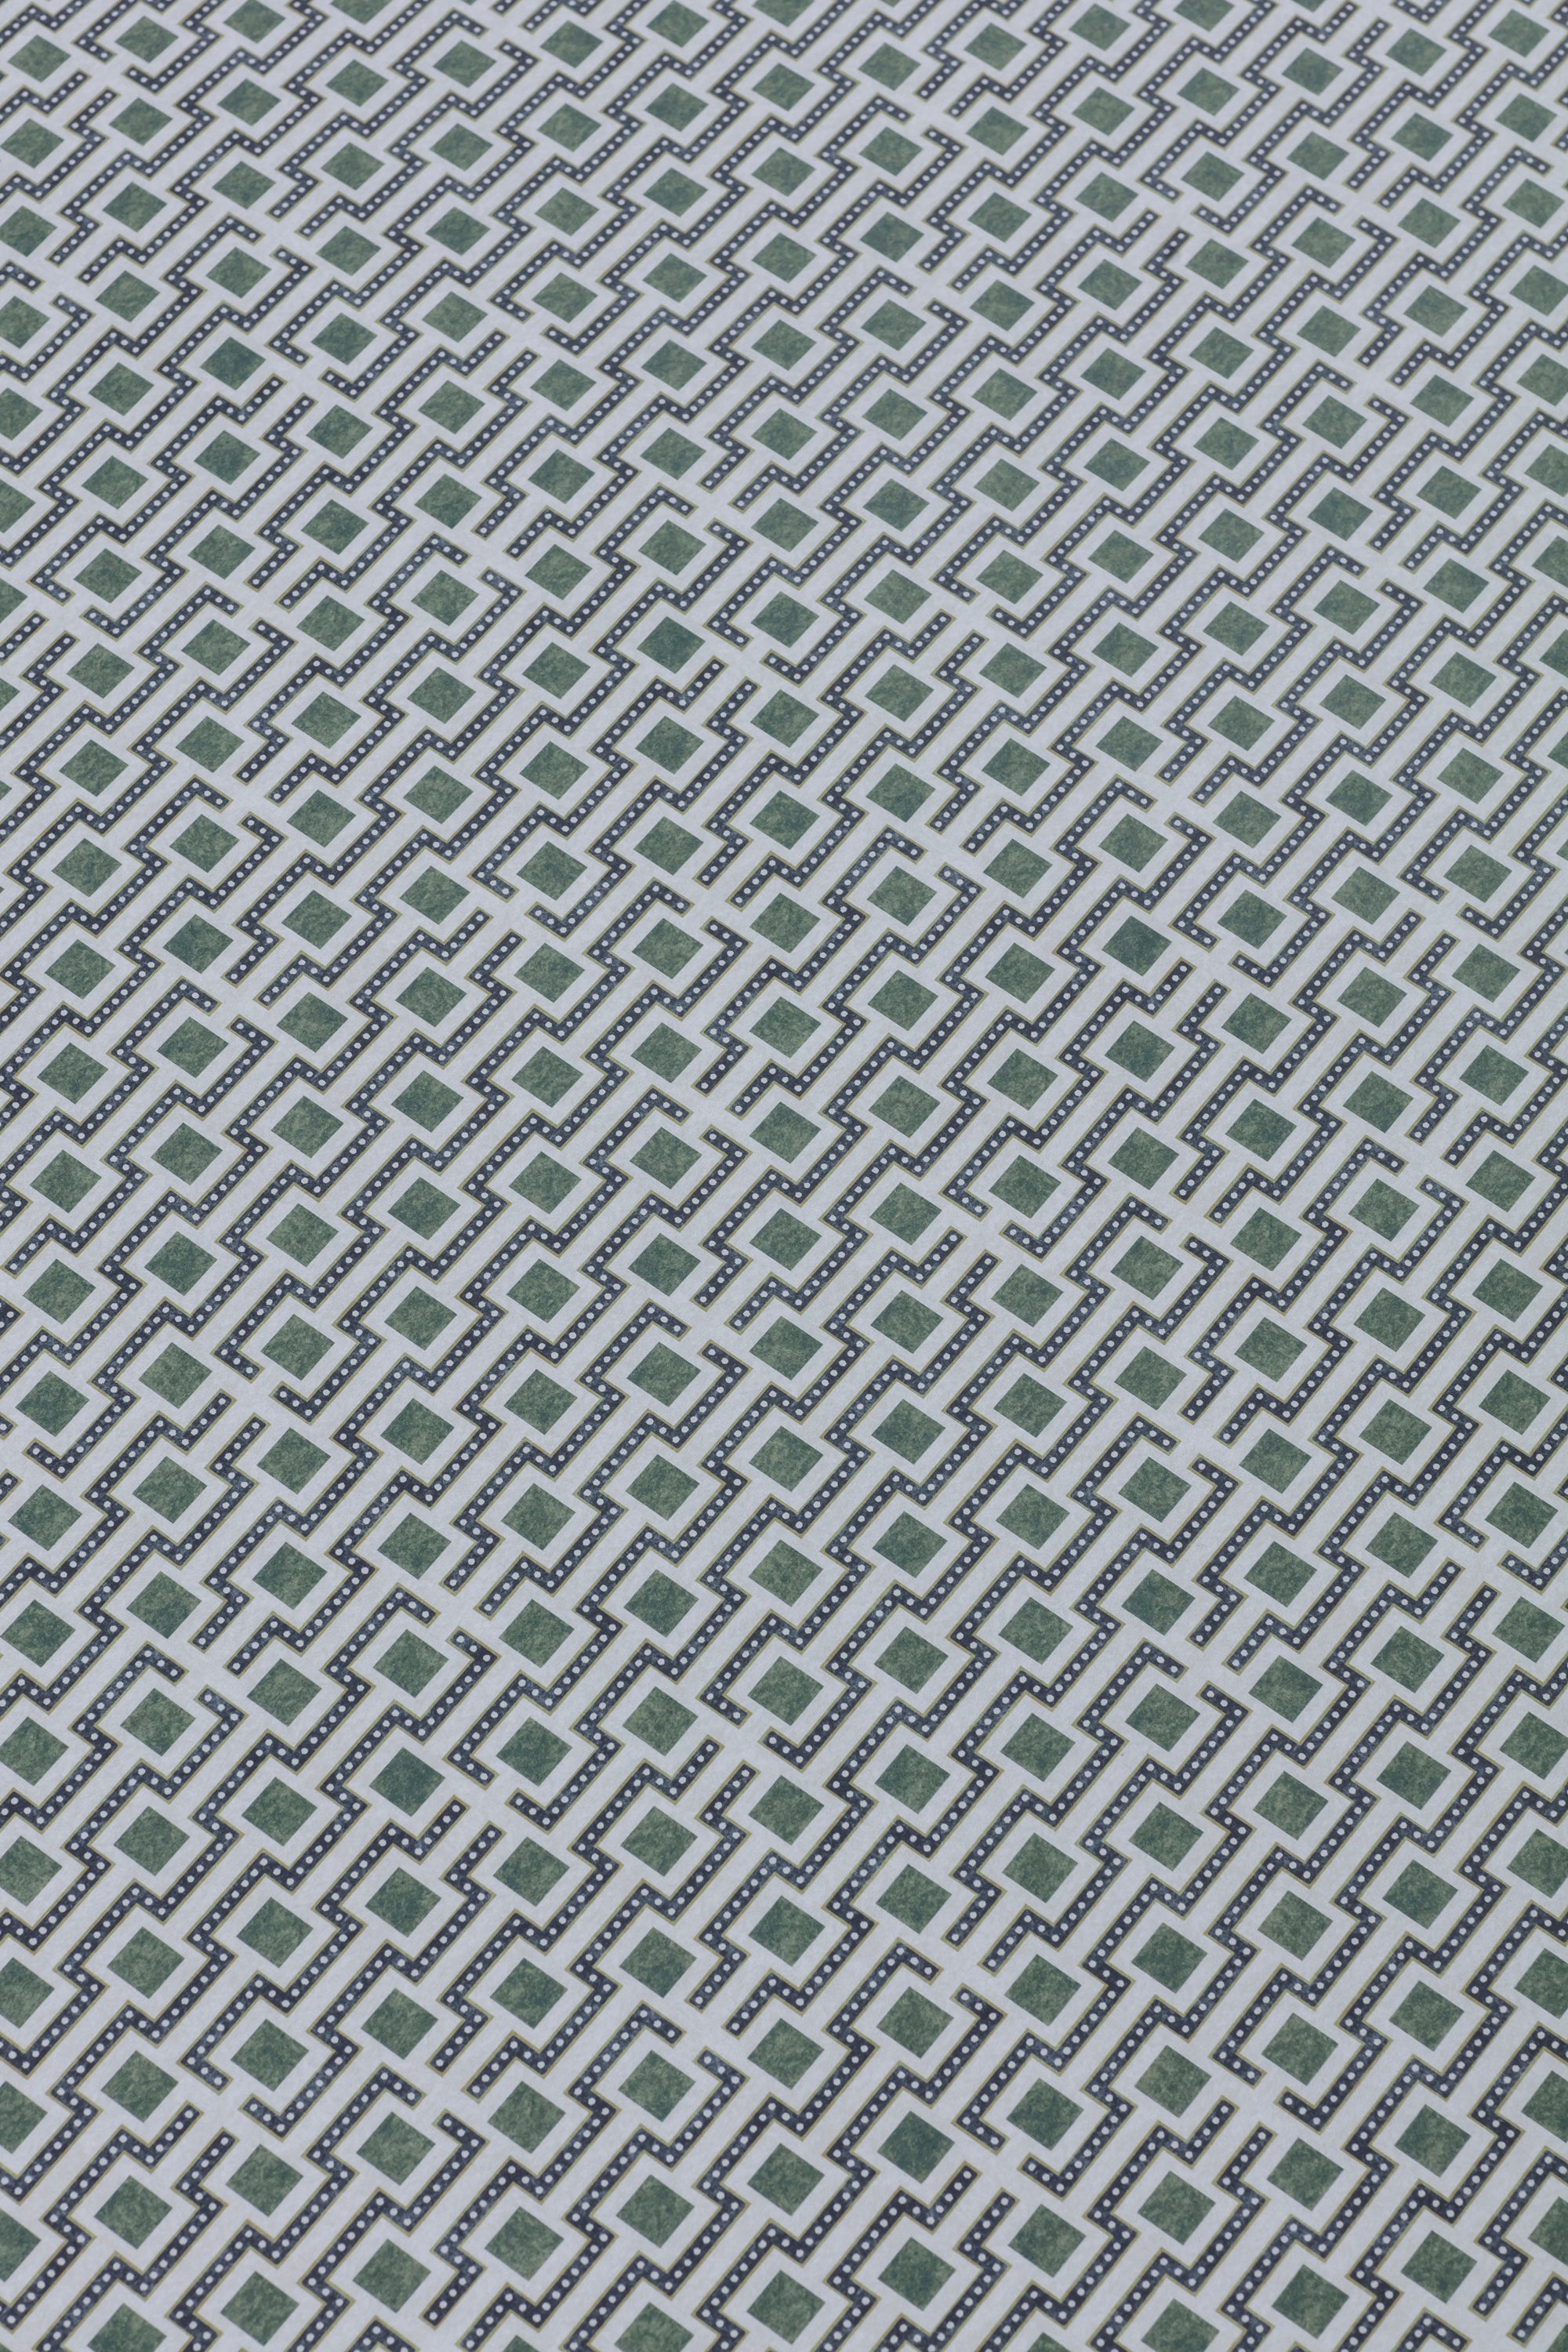 Detail of a wallpaper panel in a geometric grid print in shades of green, blue and gray.